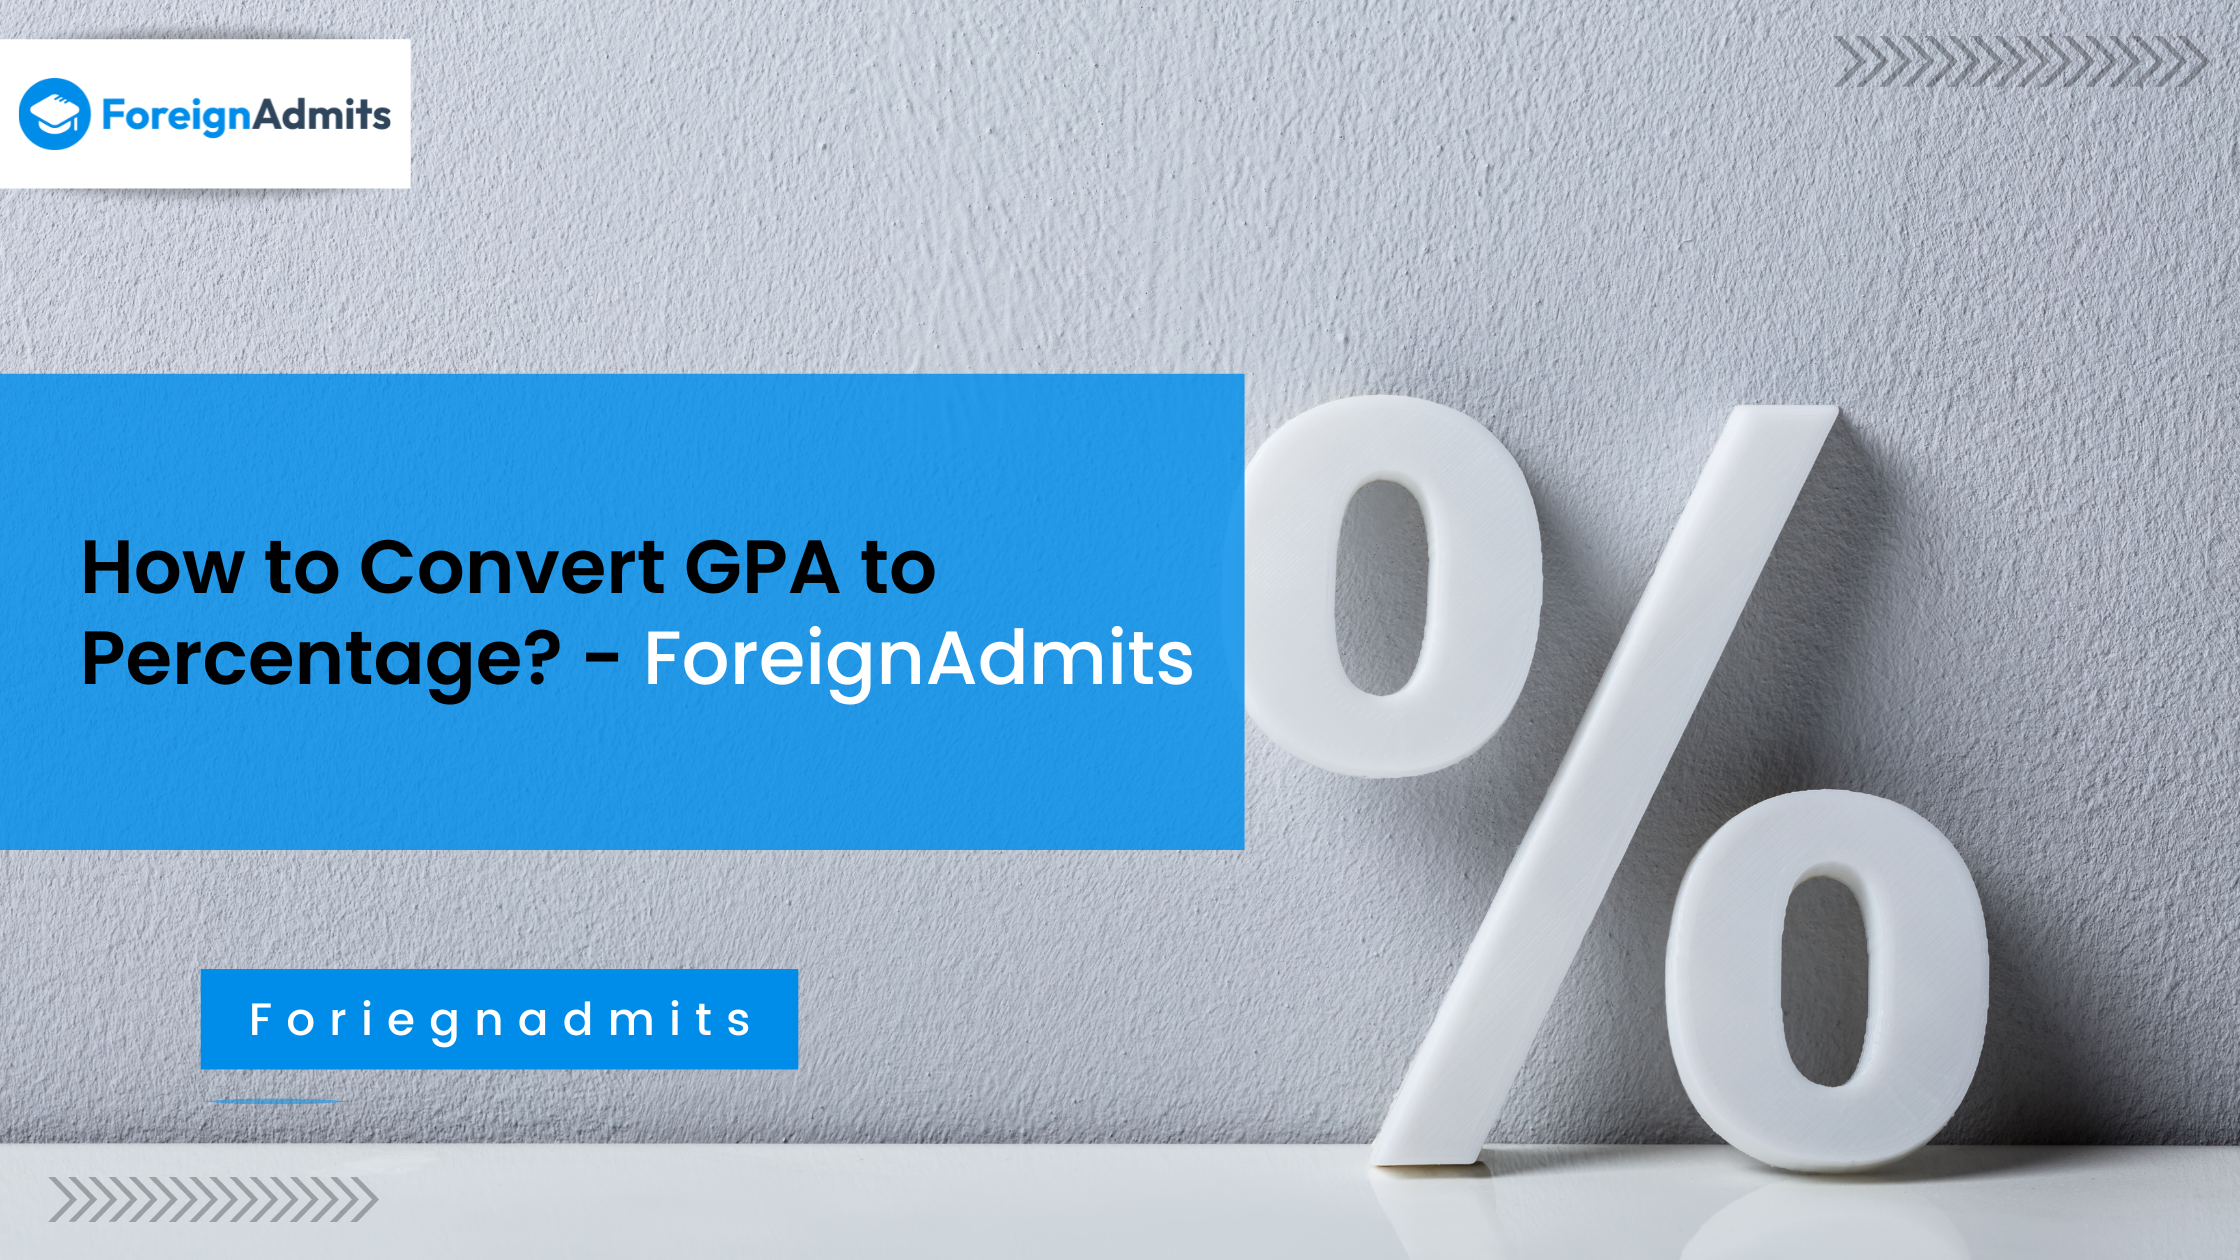 How to Convert GPA to Percentage? – ForeignAdmits